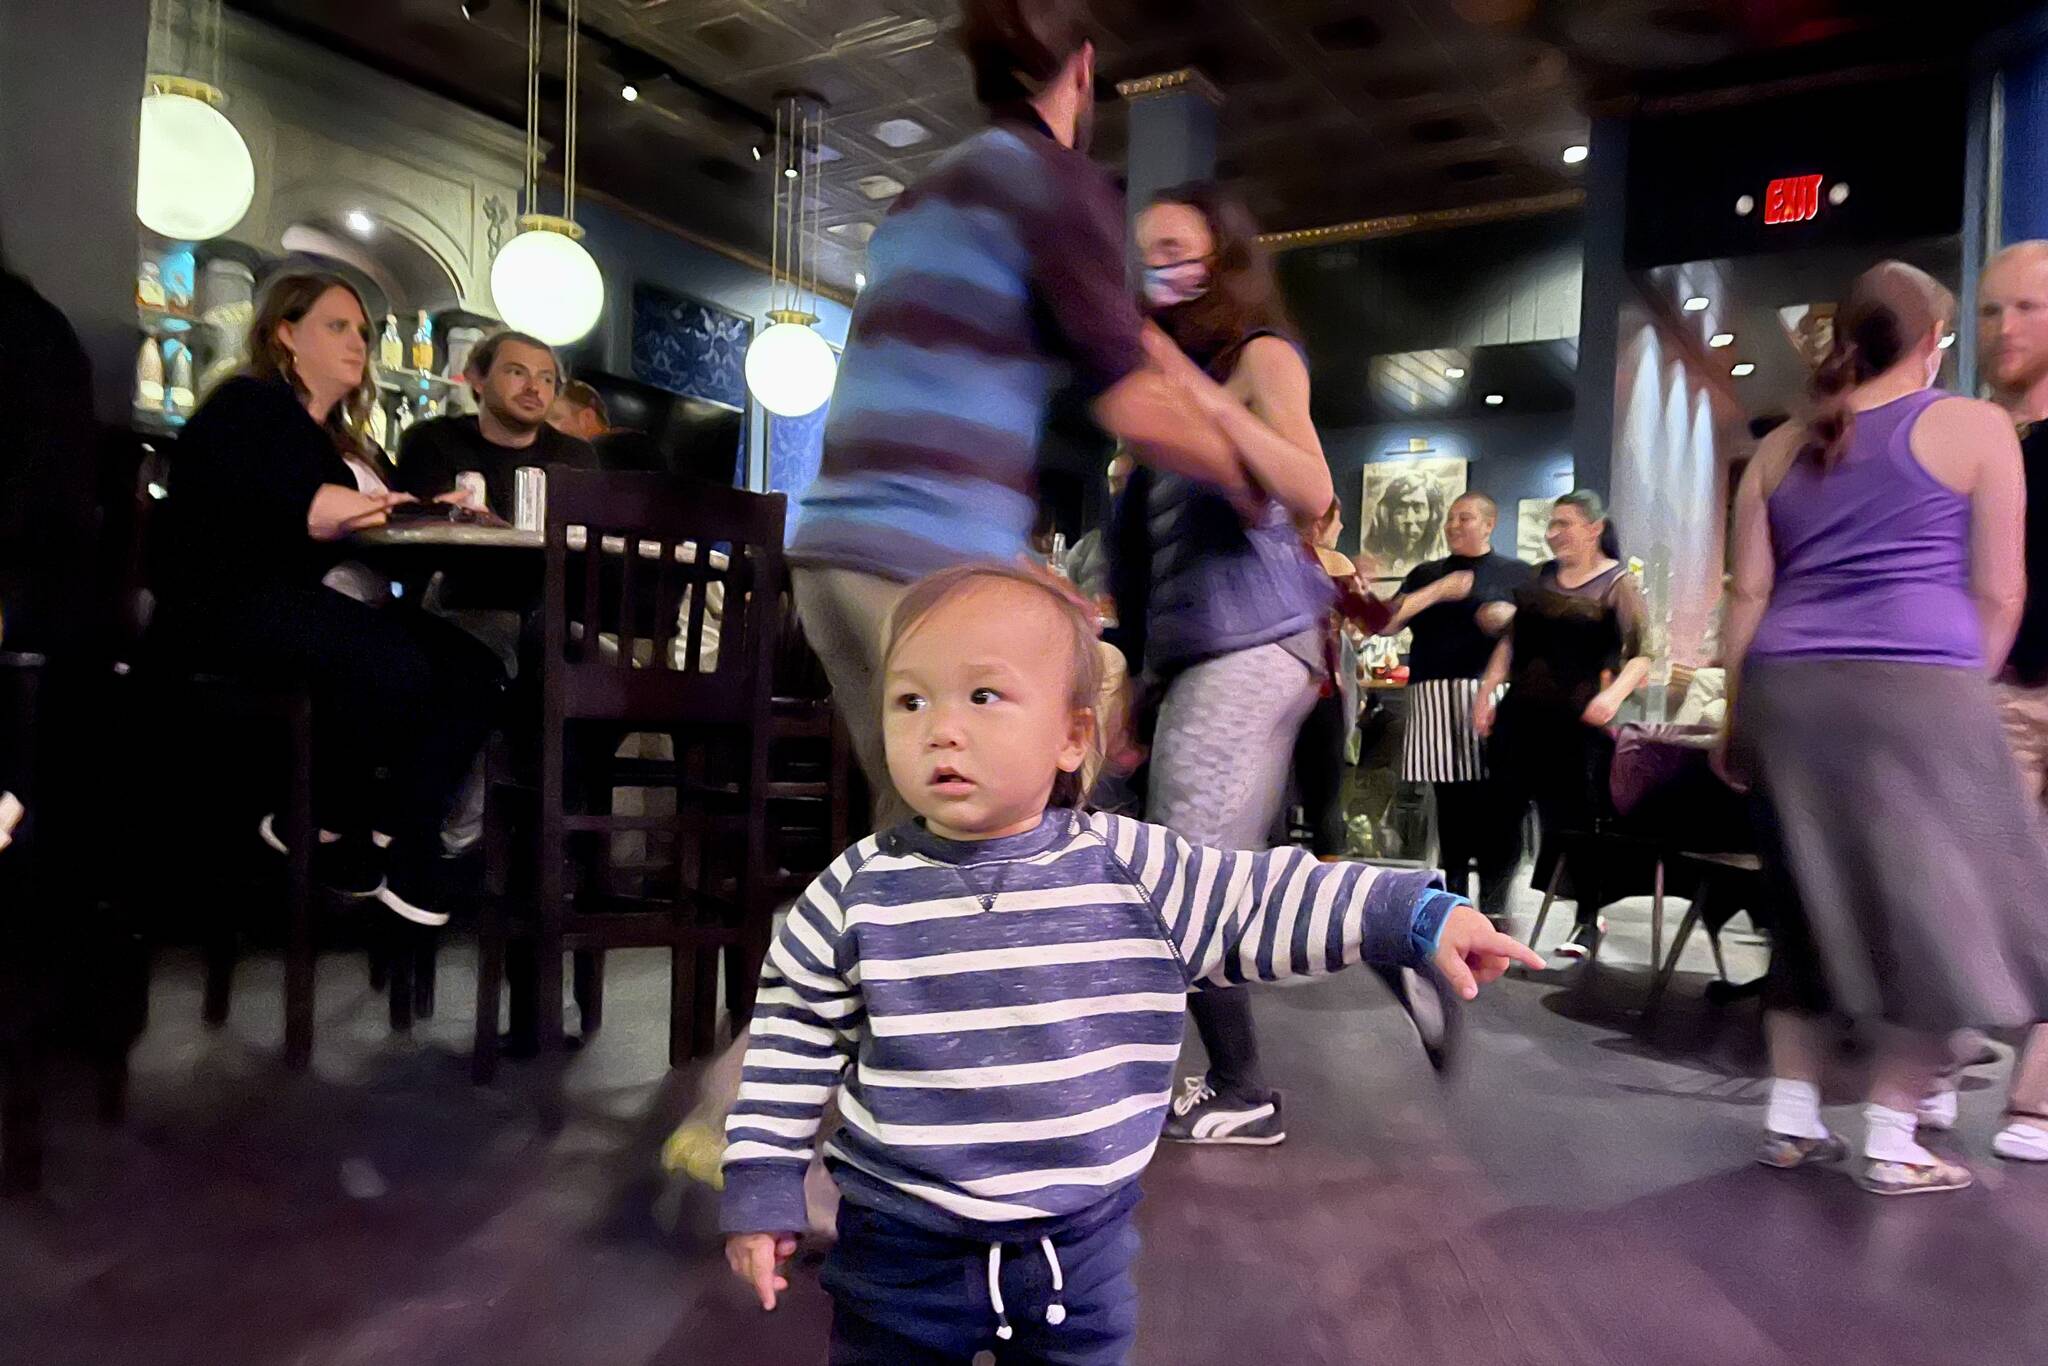 Juneau’s Kaizen Onyx proved that everyone of all ages couldn’t help but take to the dance floor at Crystal Saloon’s Saturday blues night. (Jonson Kuhn / Juneau Empire)